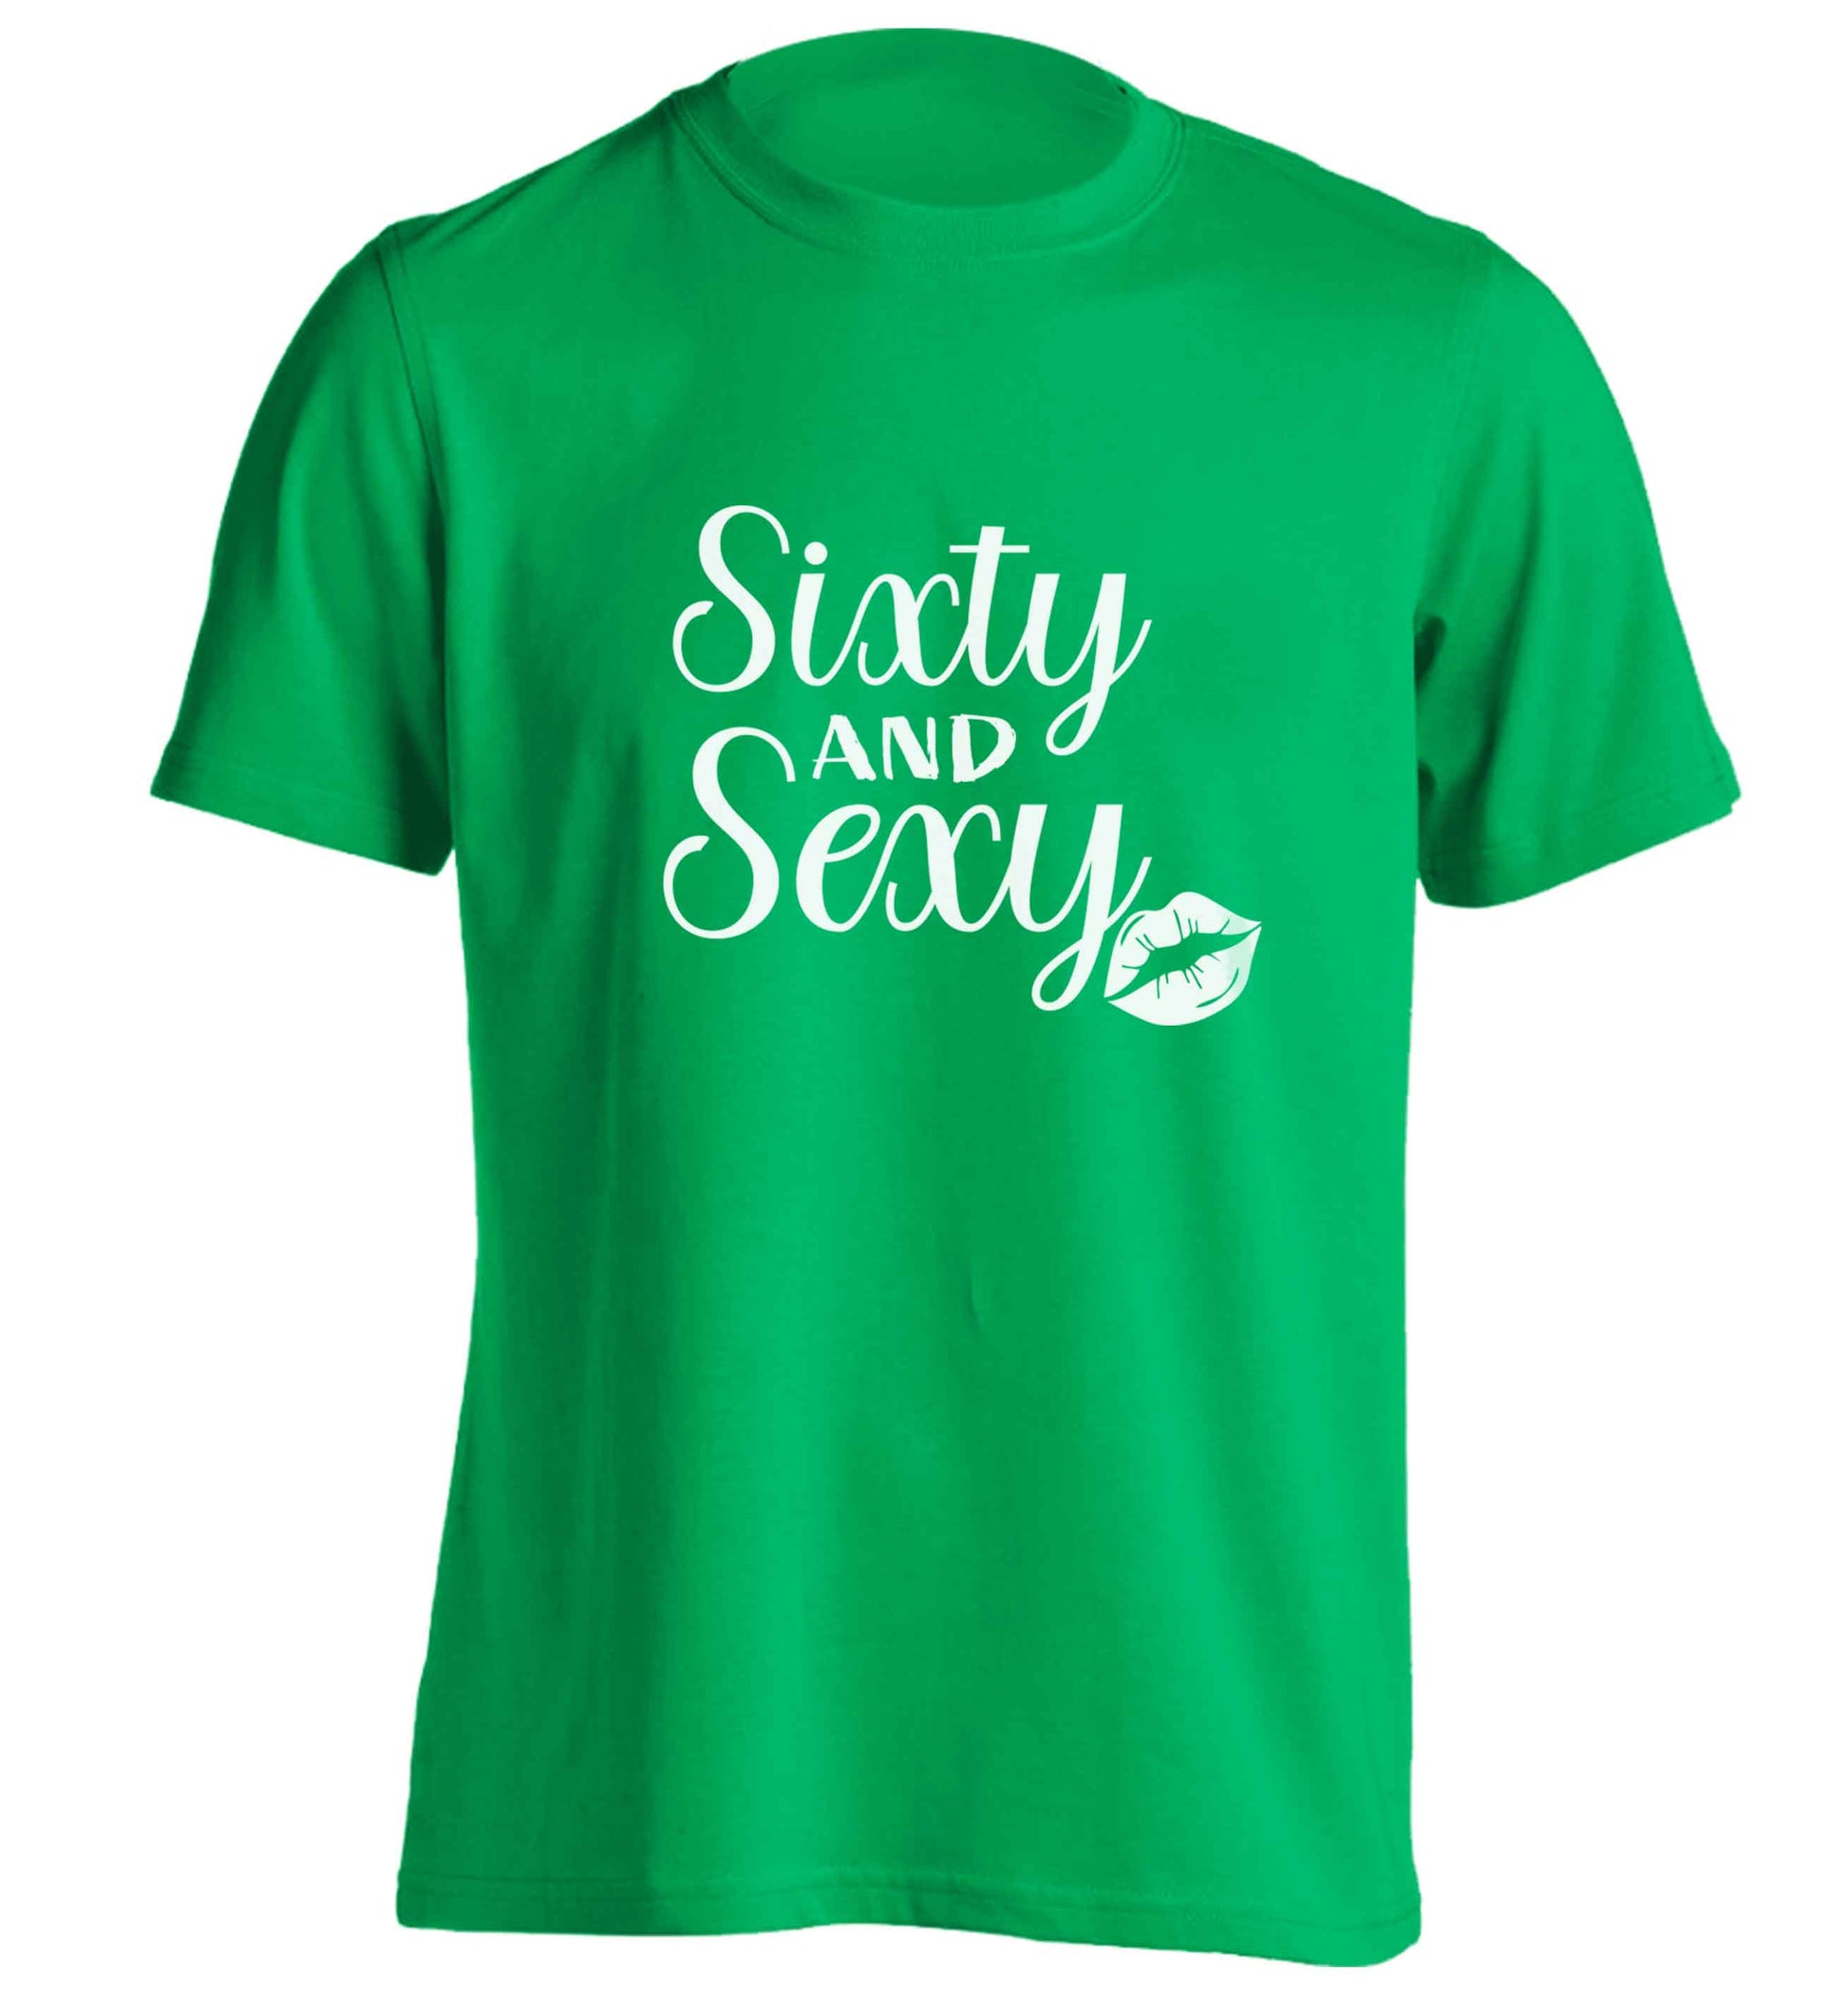 Sixty and sexy adults unisex green Tshirt 2XL